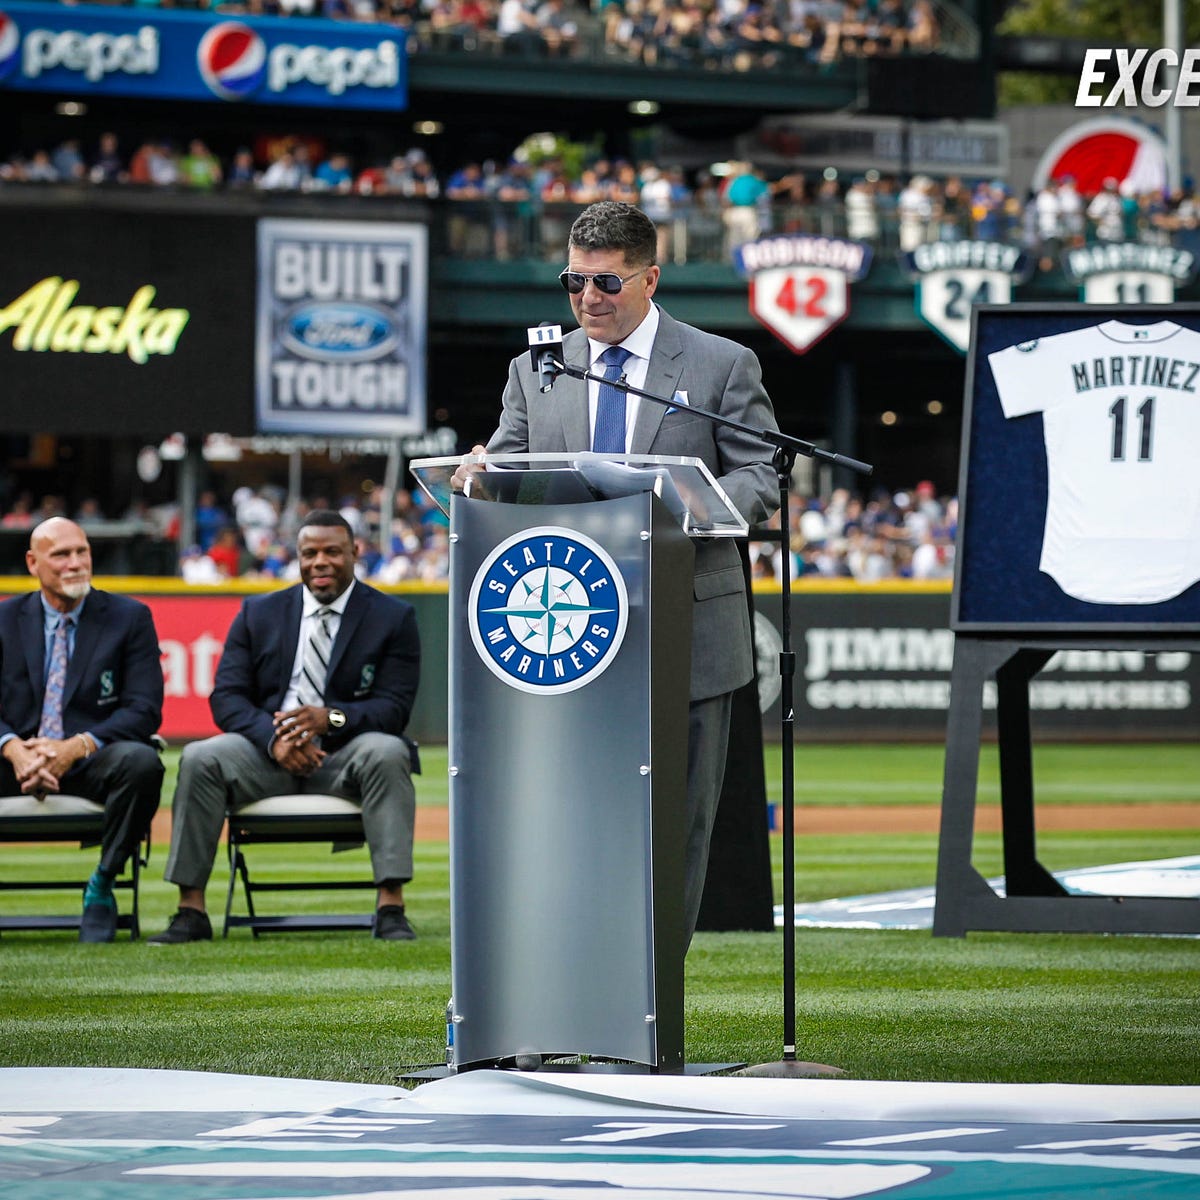 Mariners Retired Numbers